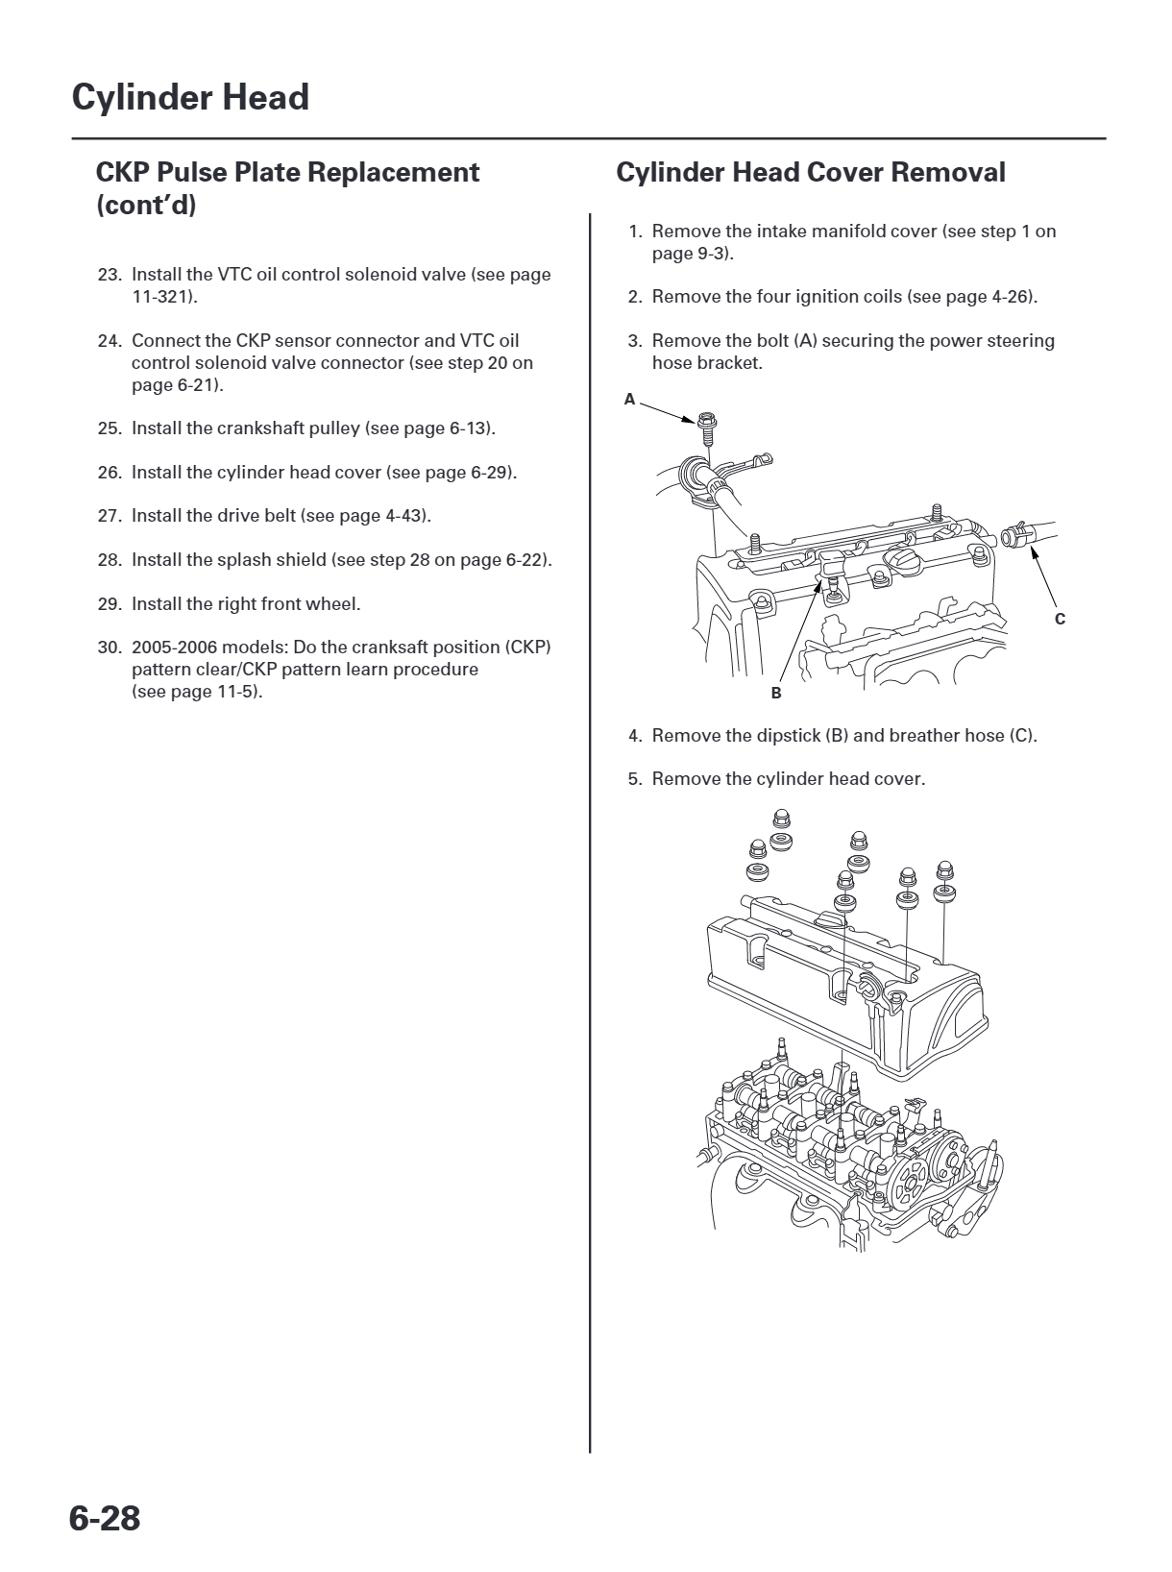 FREE DOWNLOAD ACURA RSX TYPE-S K20A2/K20Z1 SERVICE MANUAL PART 2